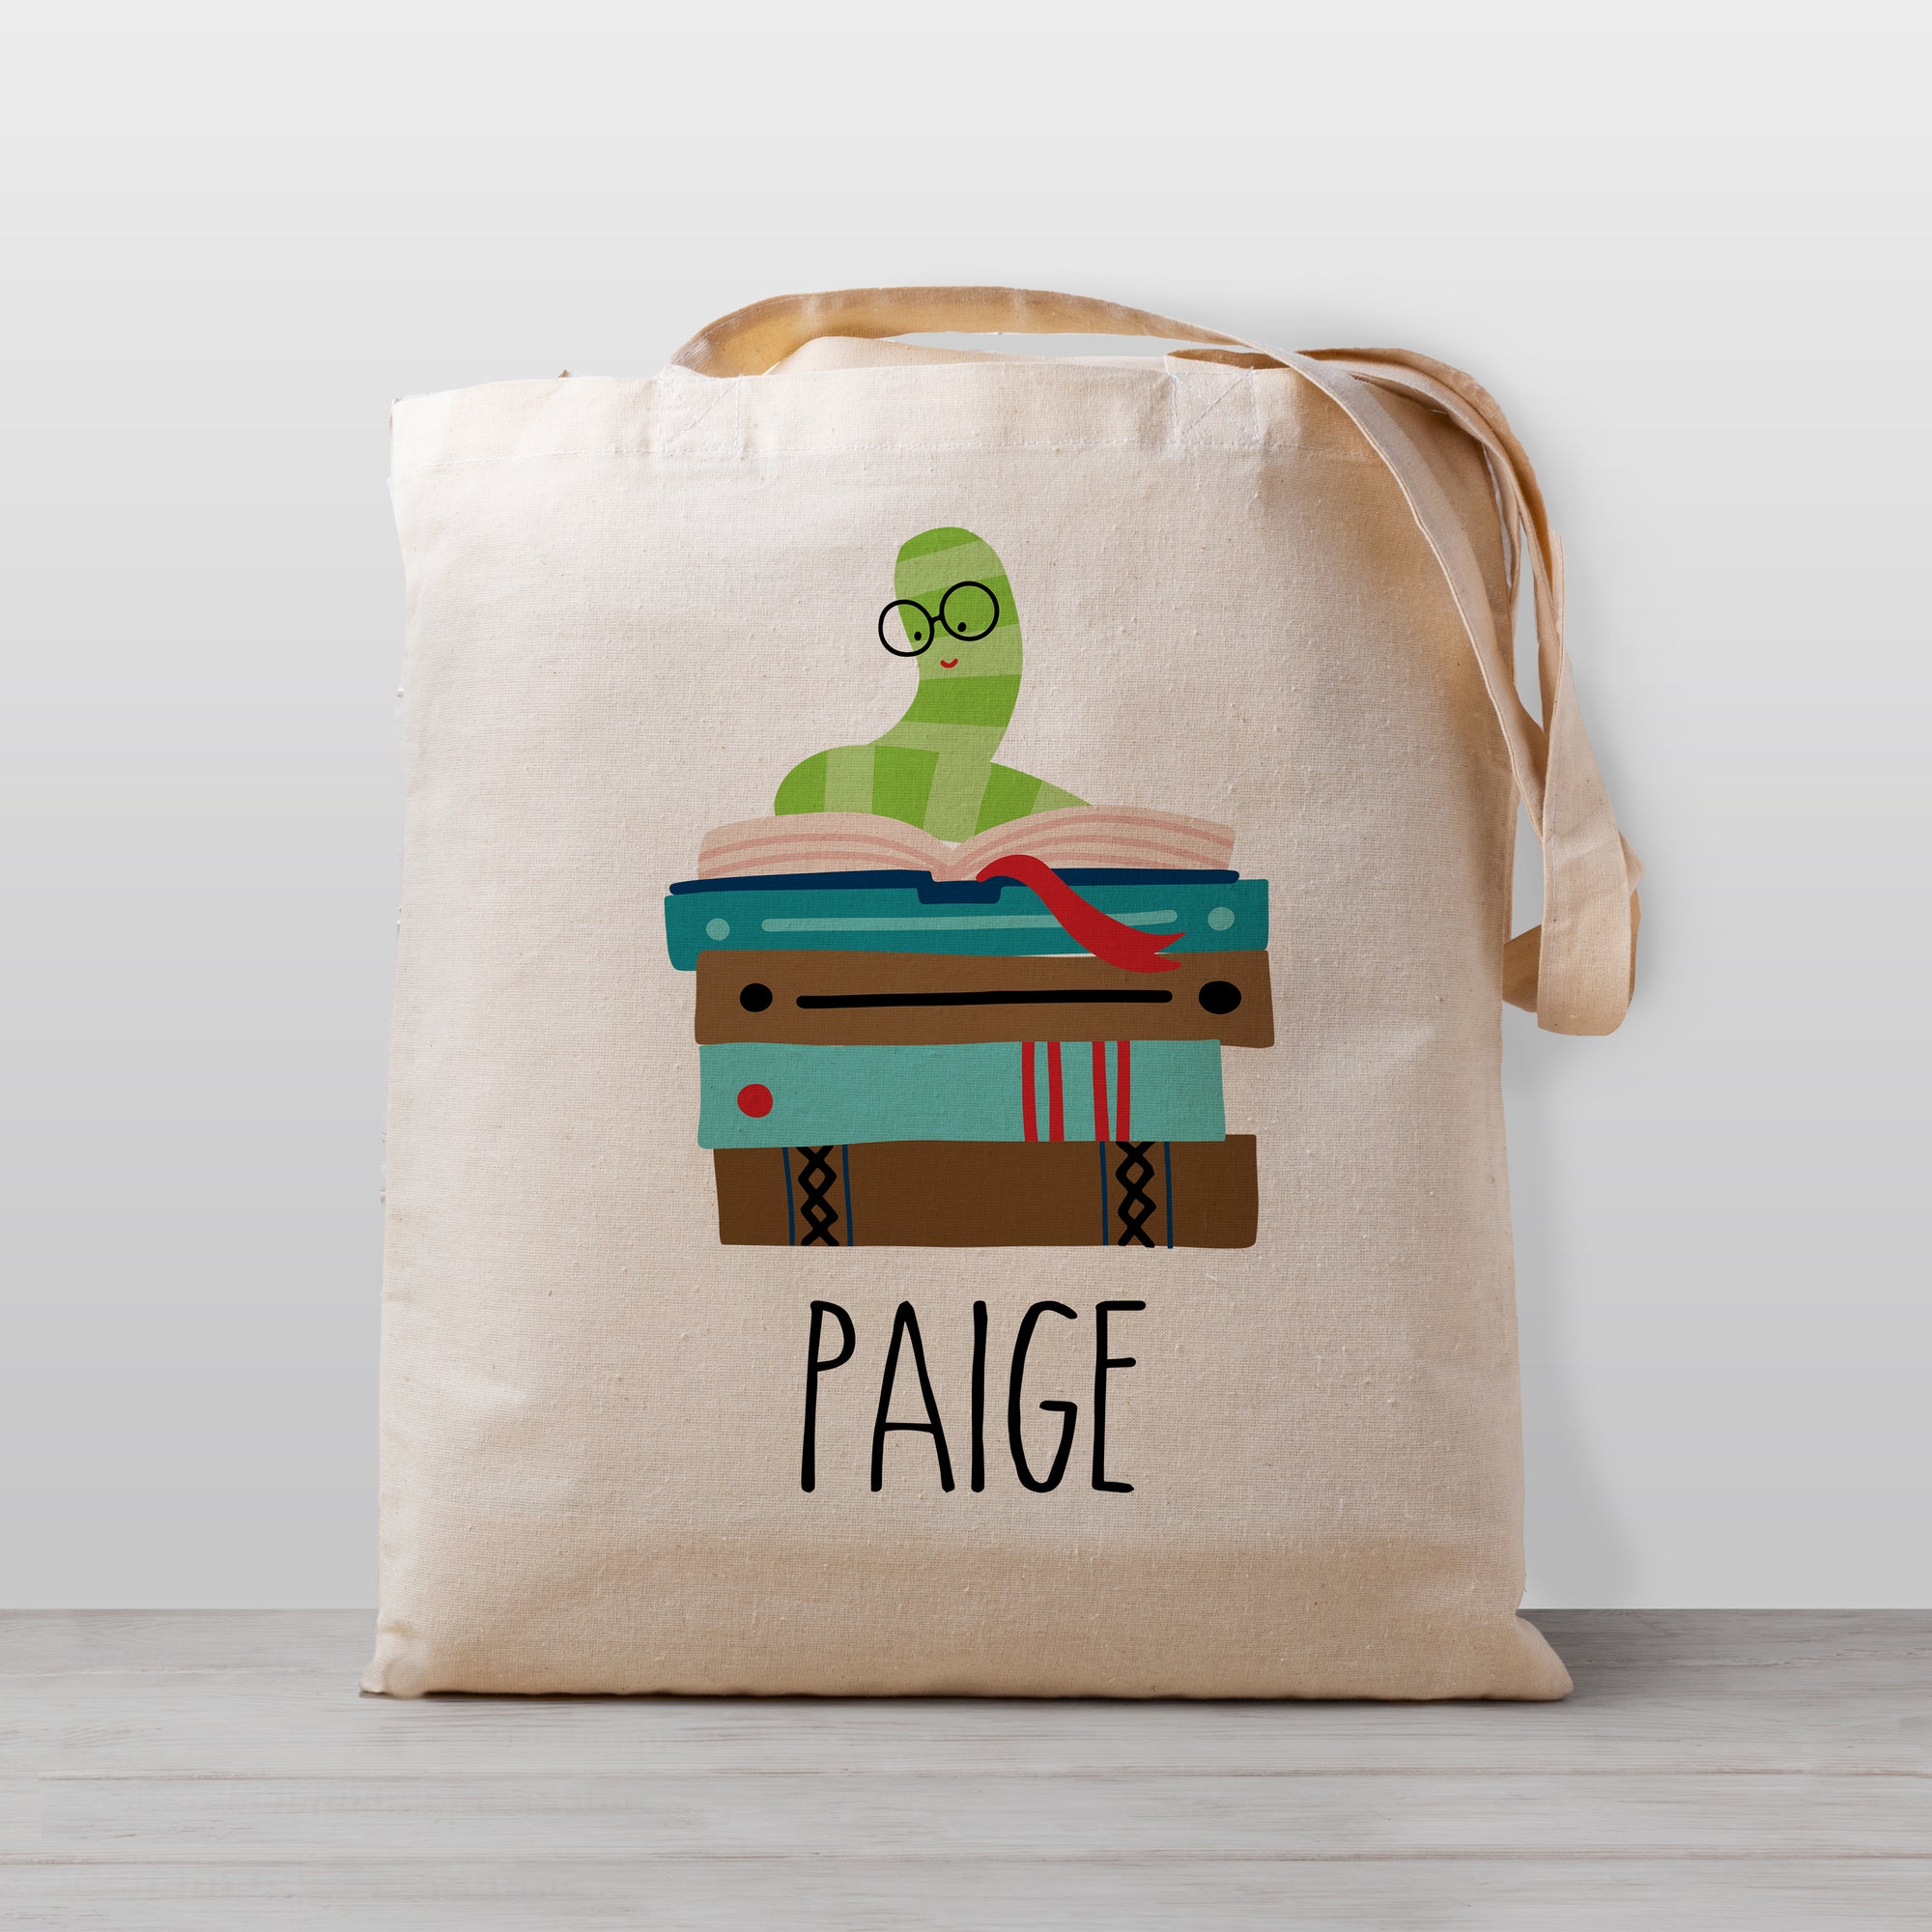 Kids library book bag, personalized with a book work on a stack of books. 100% natural cotton canvas